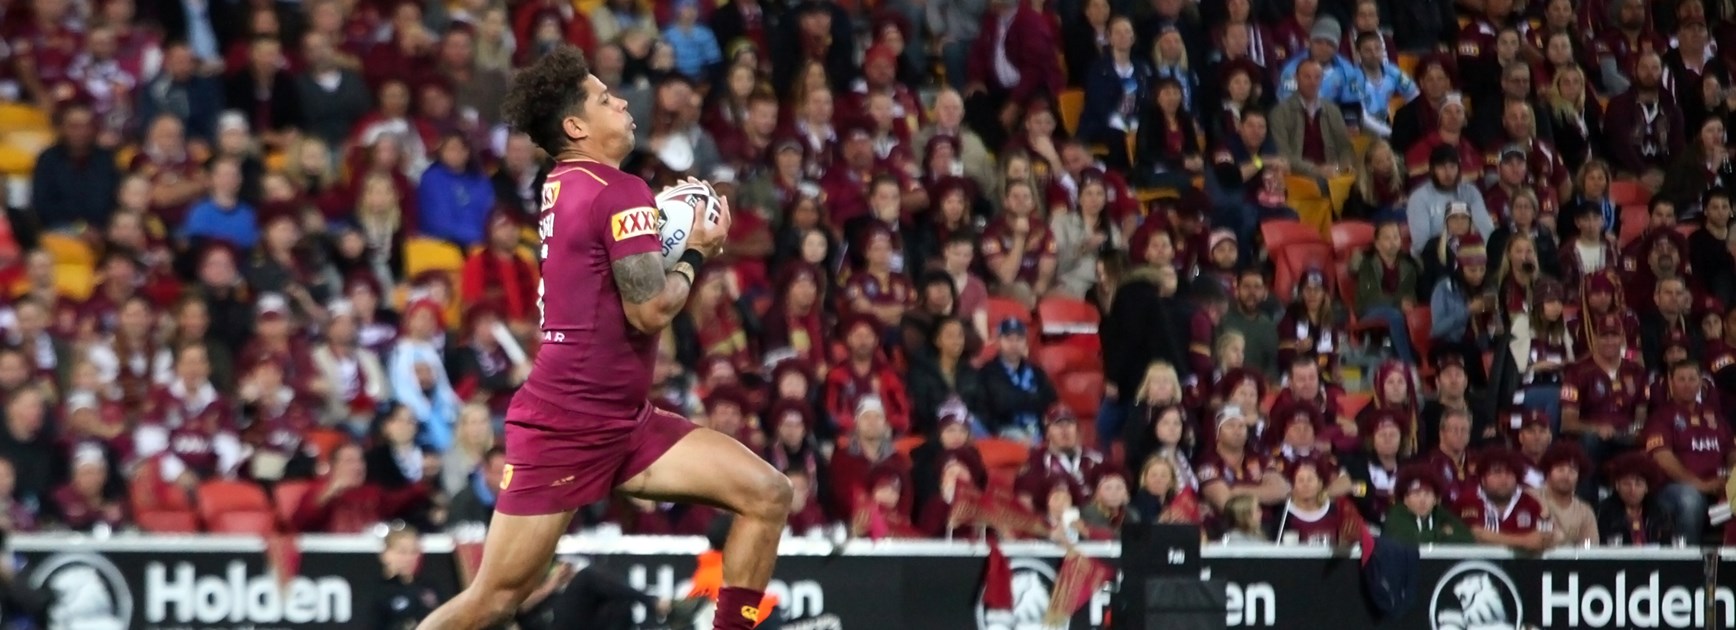 Who has the best strike rate for Maroons?